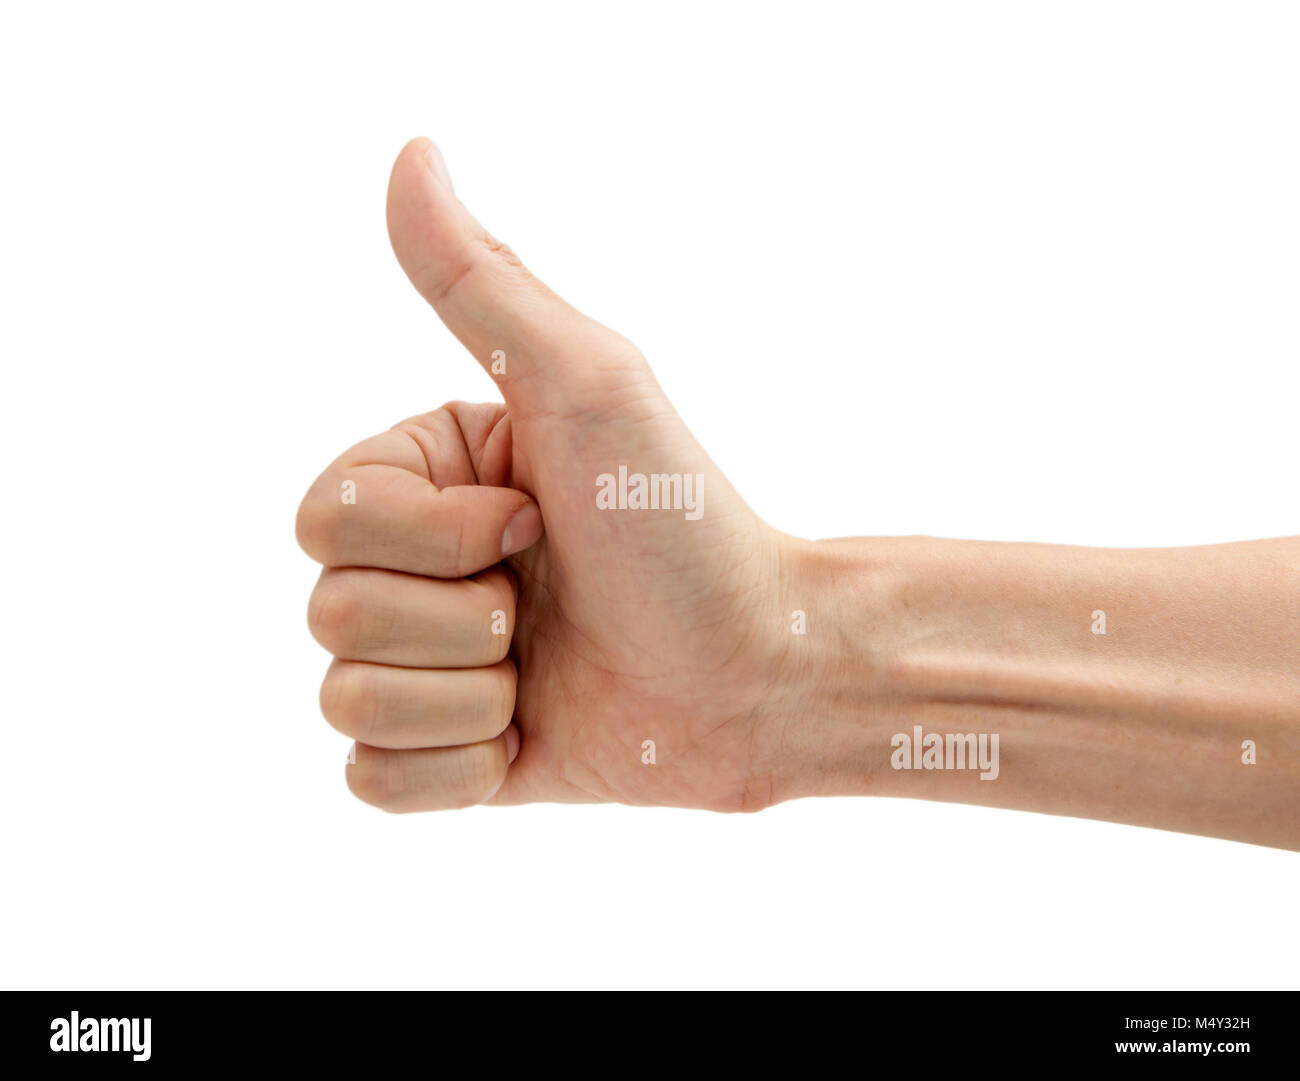 Man hand with thumb up isolated on white background Stock Photo